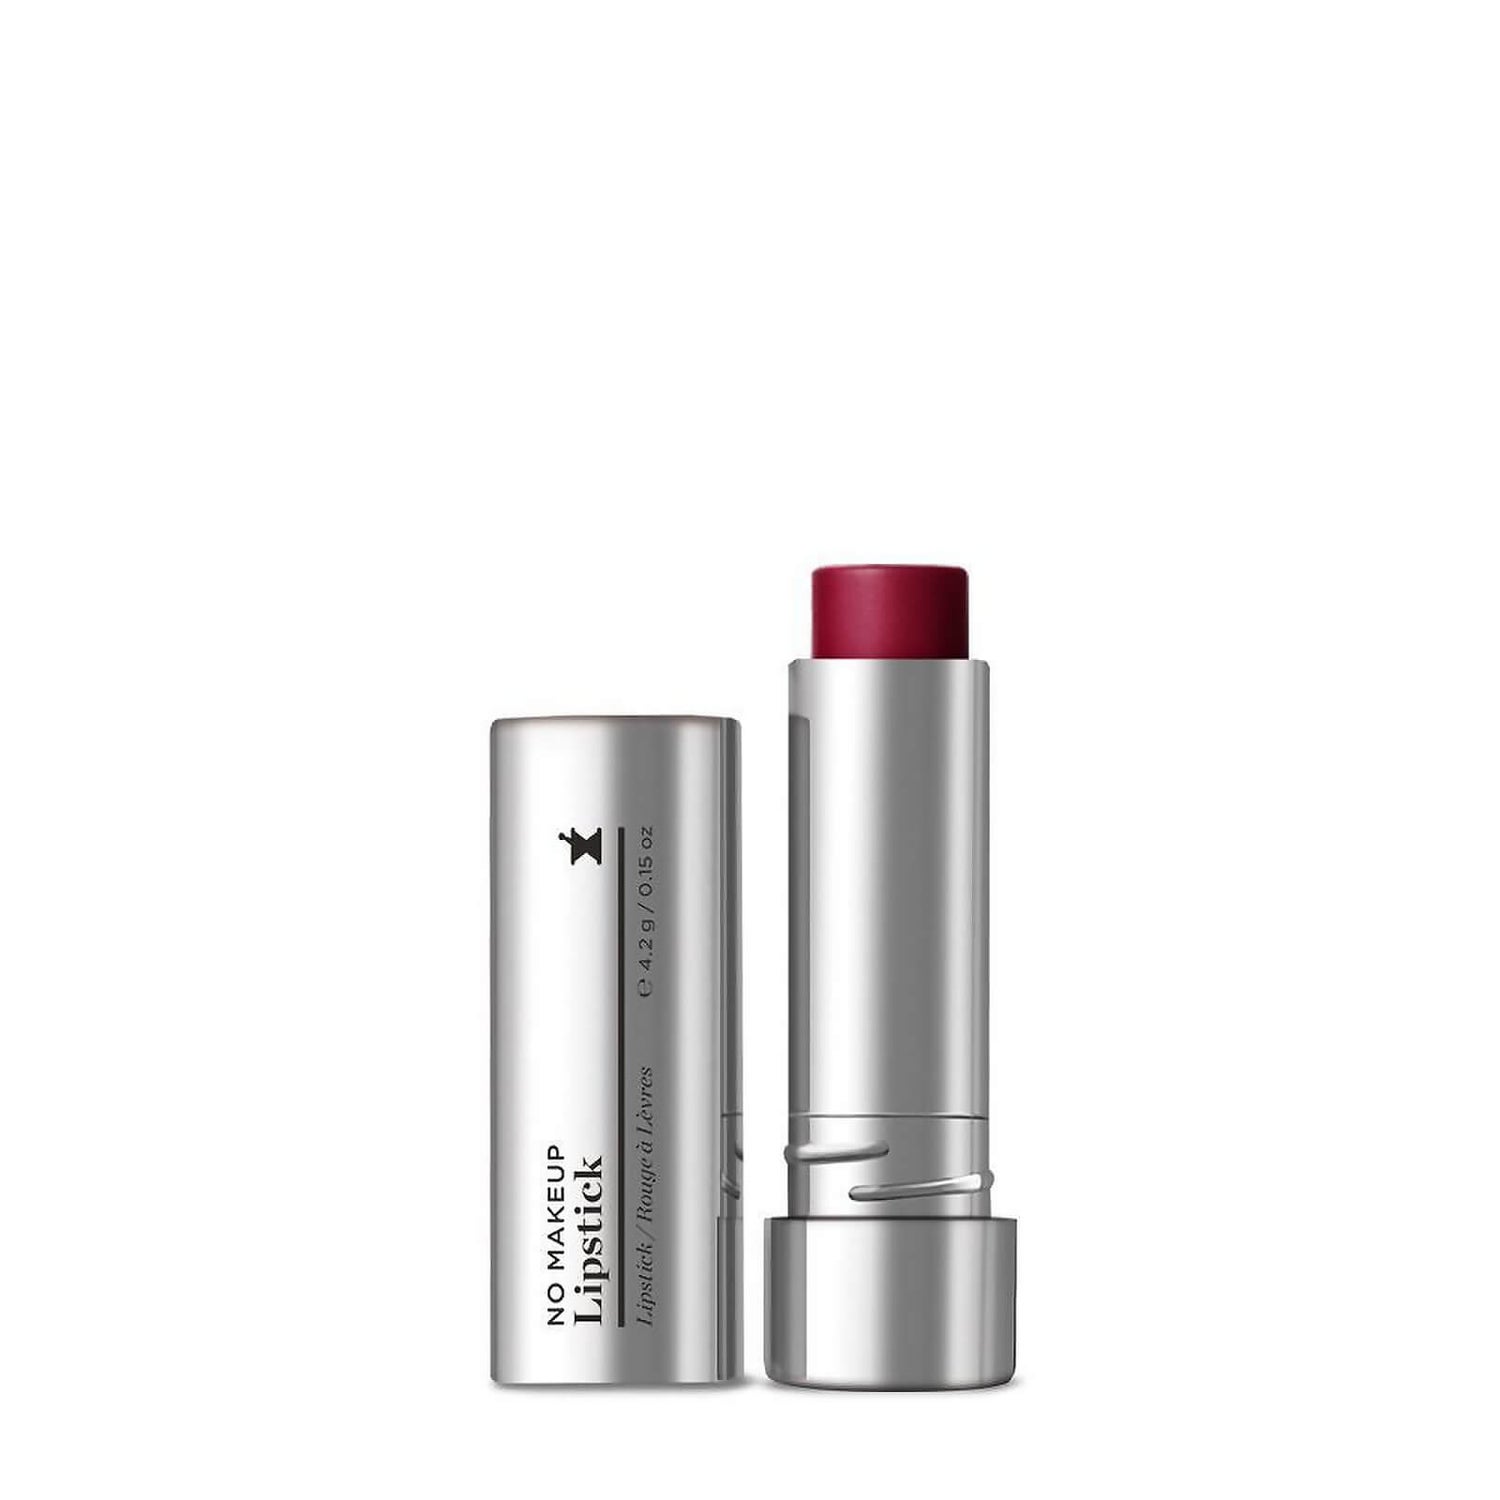 Perricone MD No Makeup Lipstick Broad Spectrum SPF15 4.2g (Various Shades) - Wine